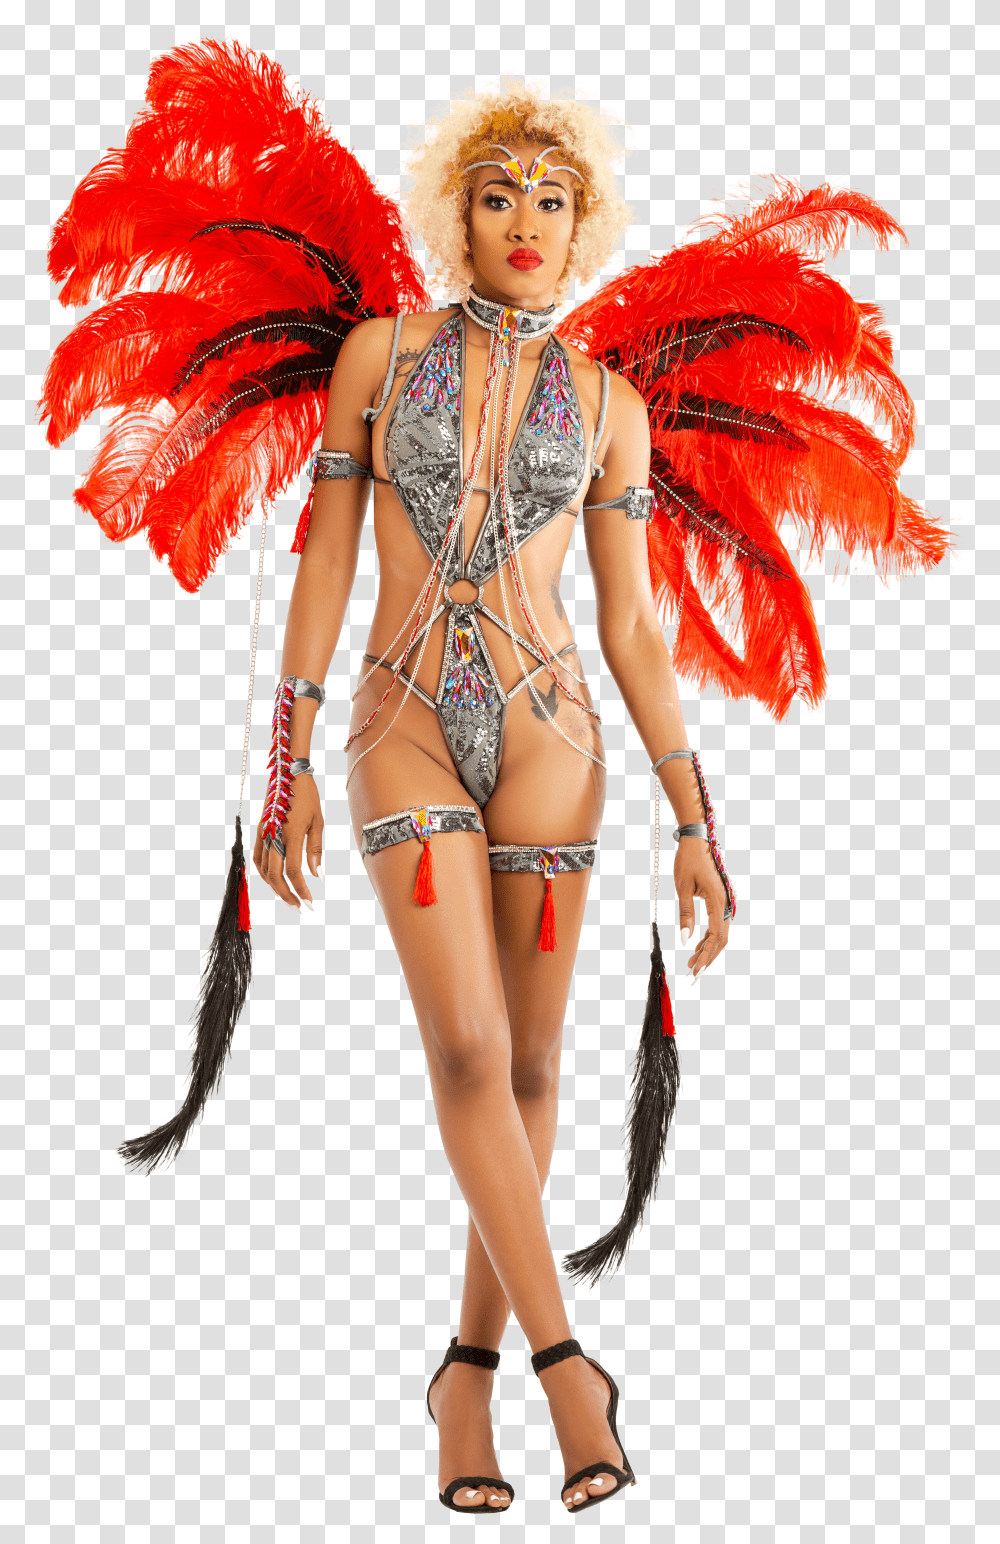 Woman Wearing Sexy Clothes Transparent Png